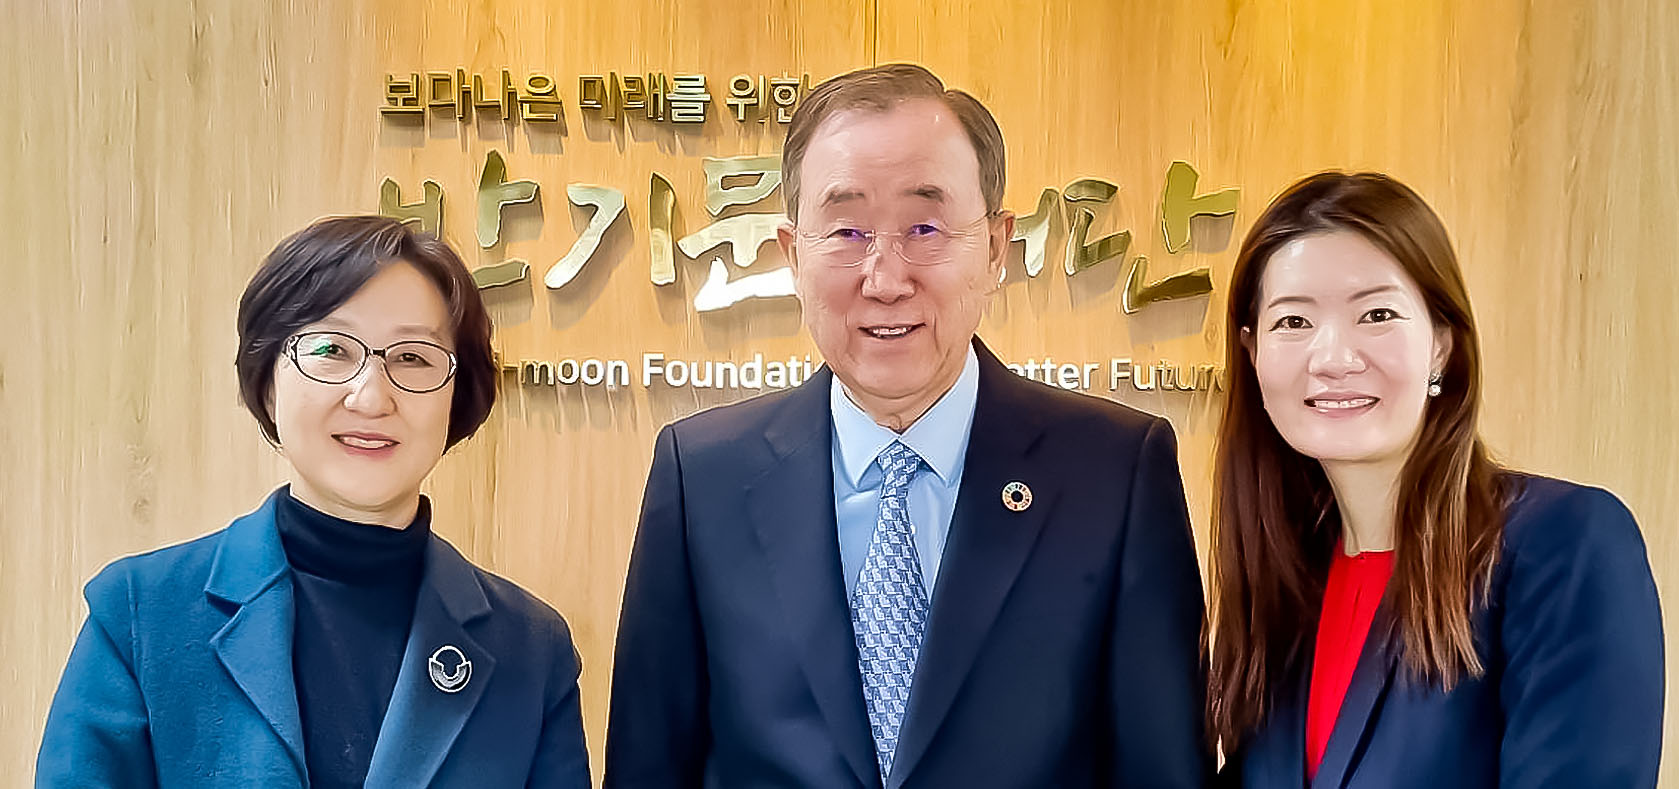 The Director of the UN Women's Centre in Seoul meets with the former UN Secretary-General Ban Ki-moon and receives his support for its future success. Photo: UN Women/Ahjung Lee